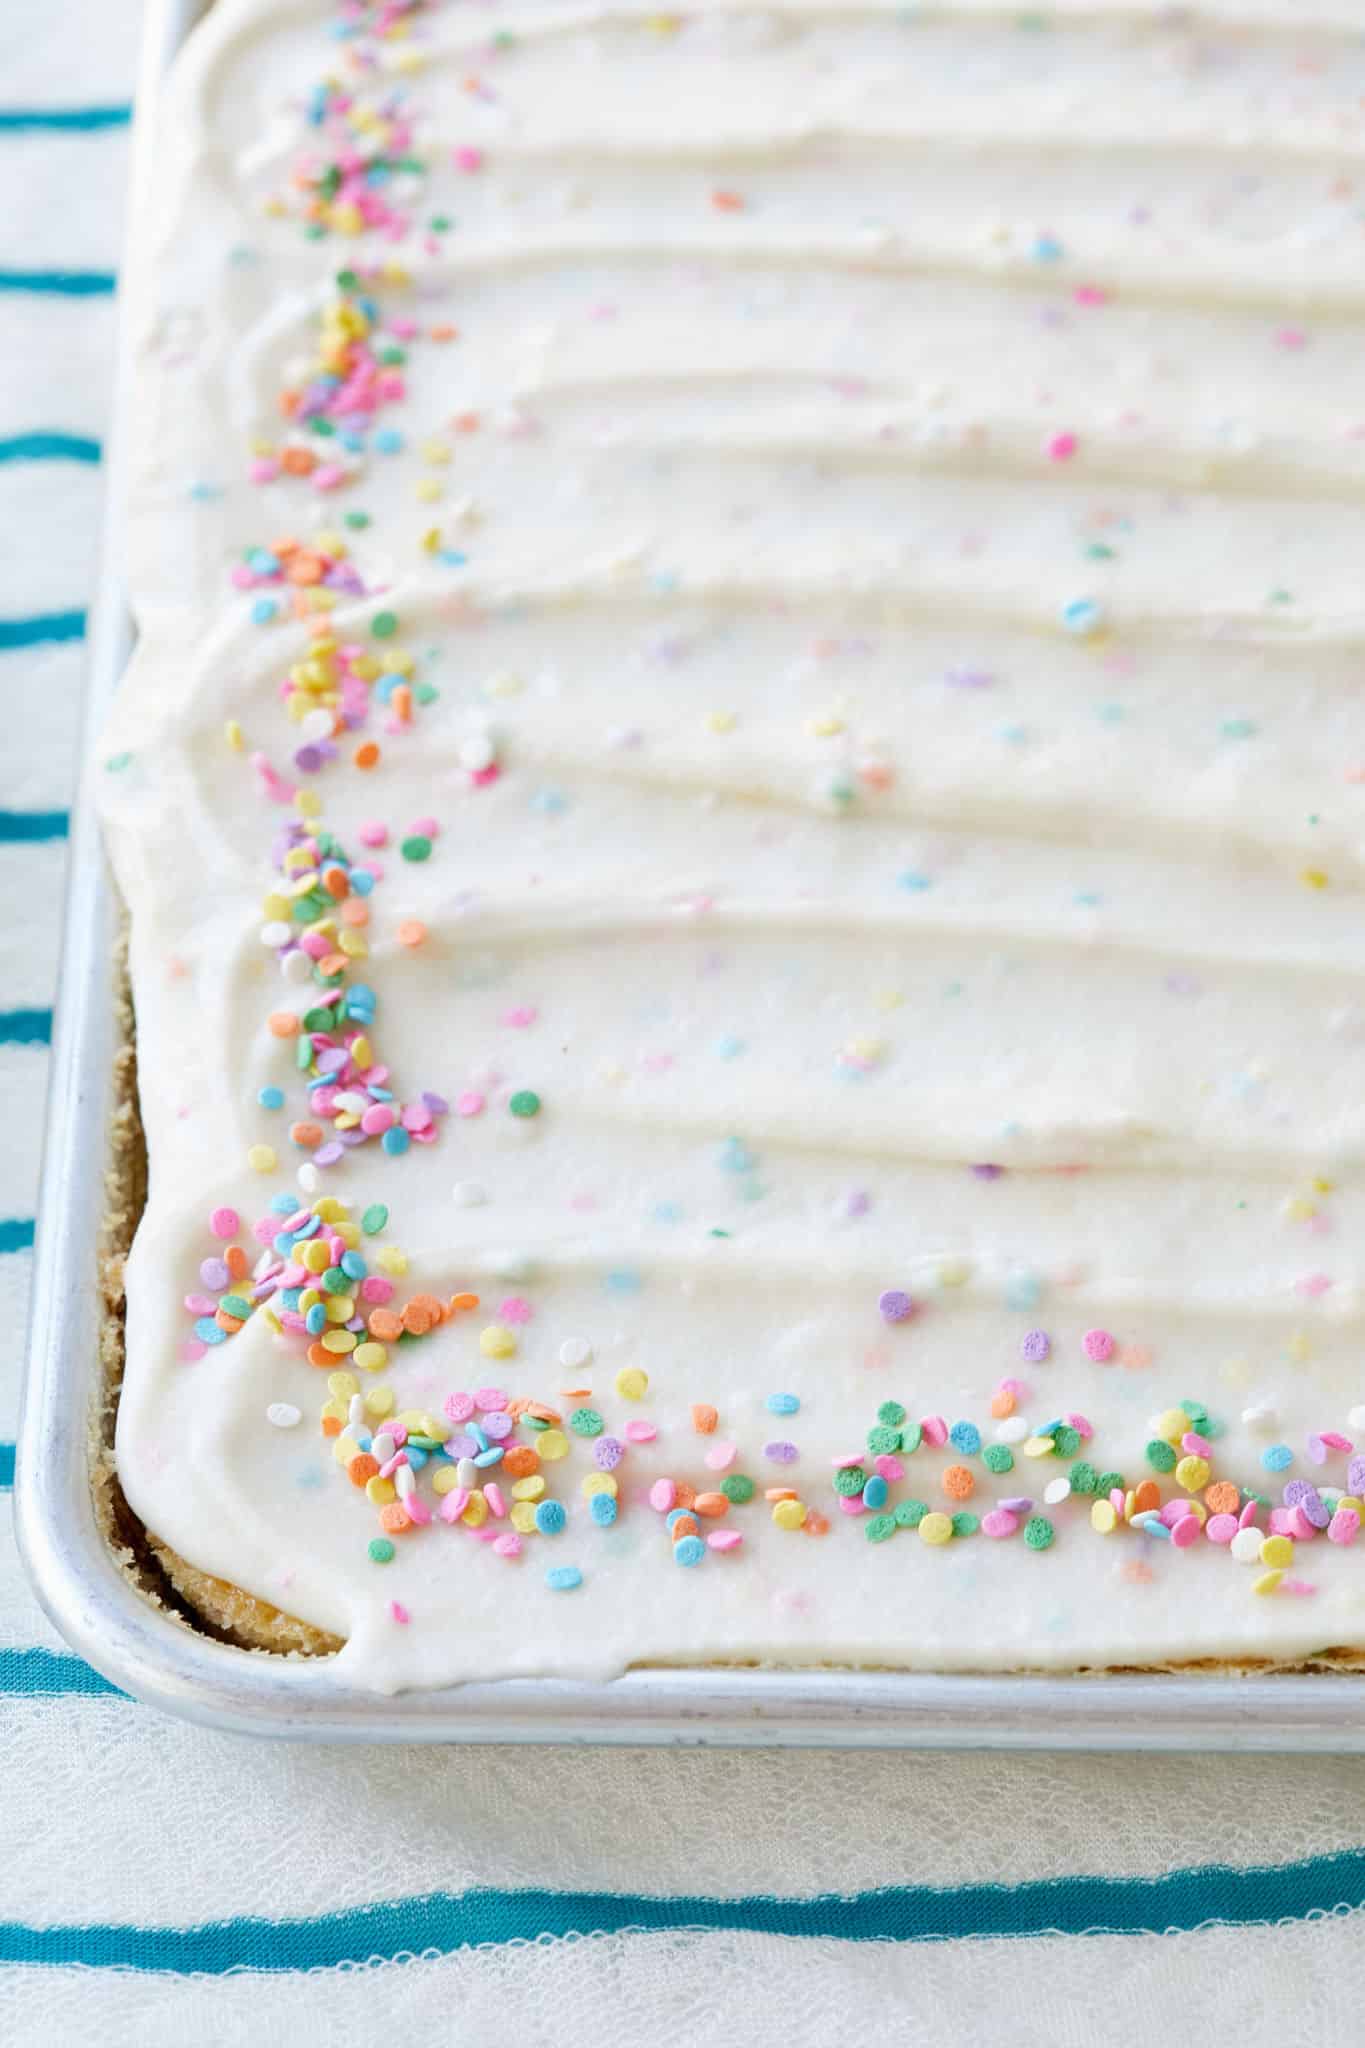 A cake topped with funfetti frosting.